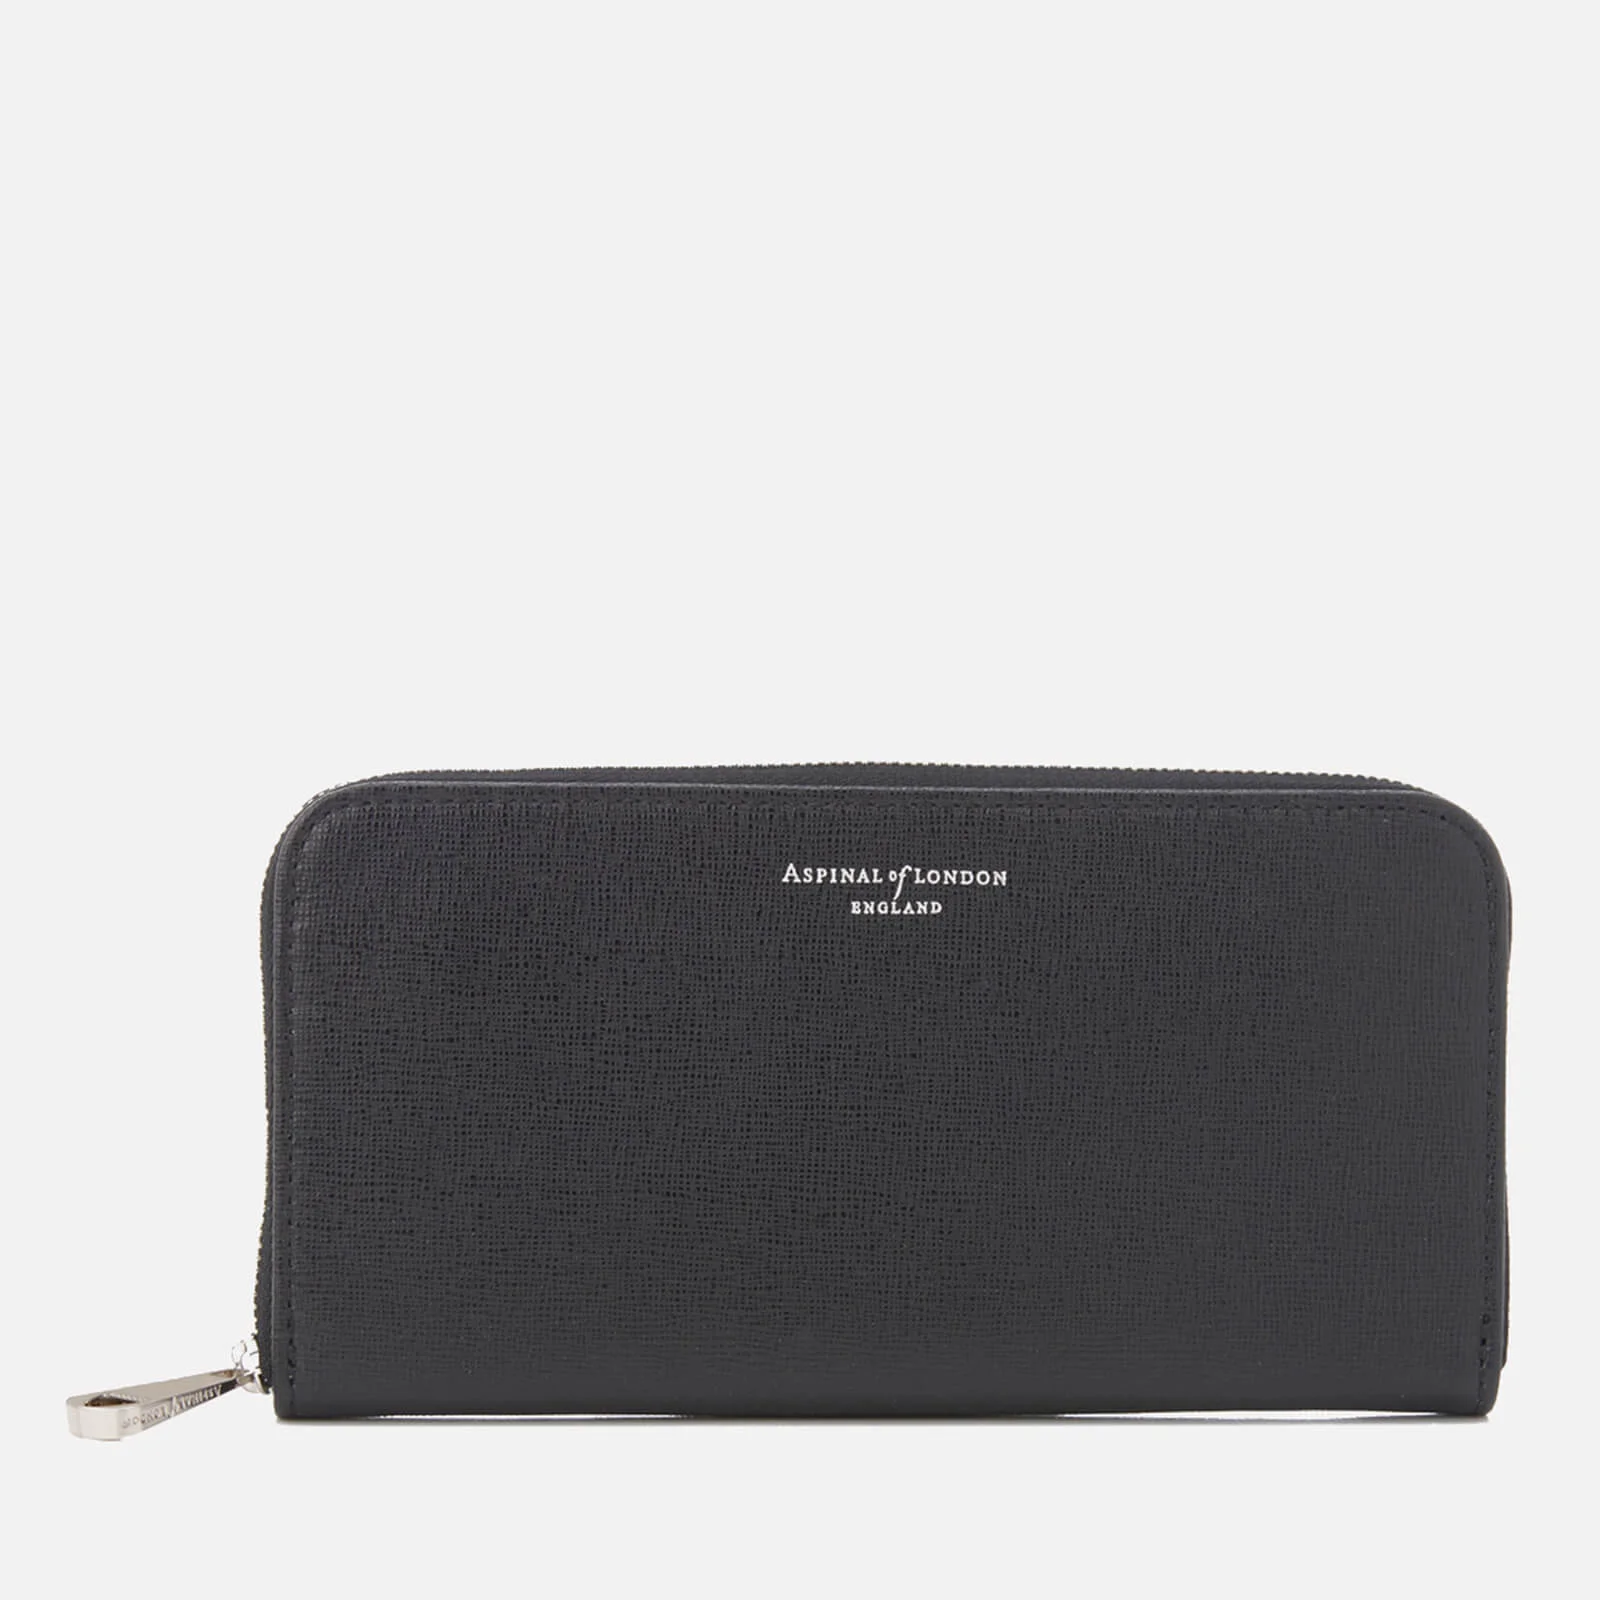 Aspinal of London Women's Continental Clutch Wallet - Black Image 1